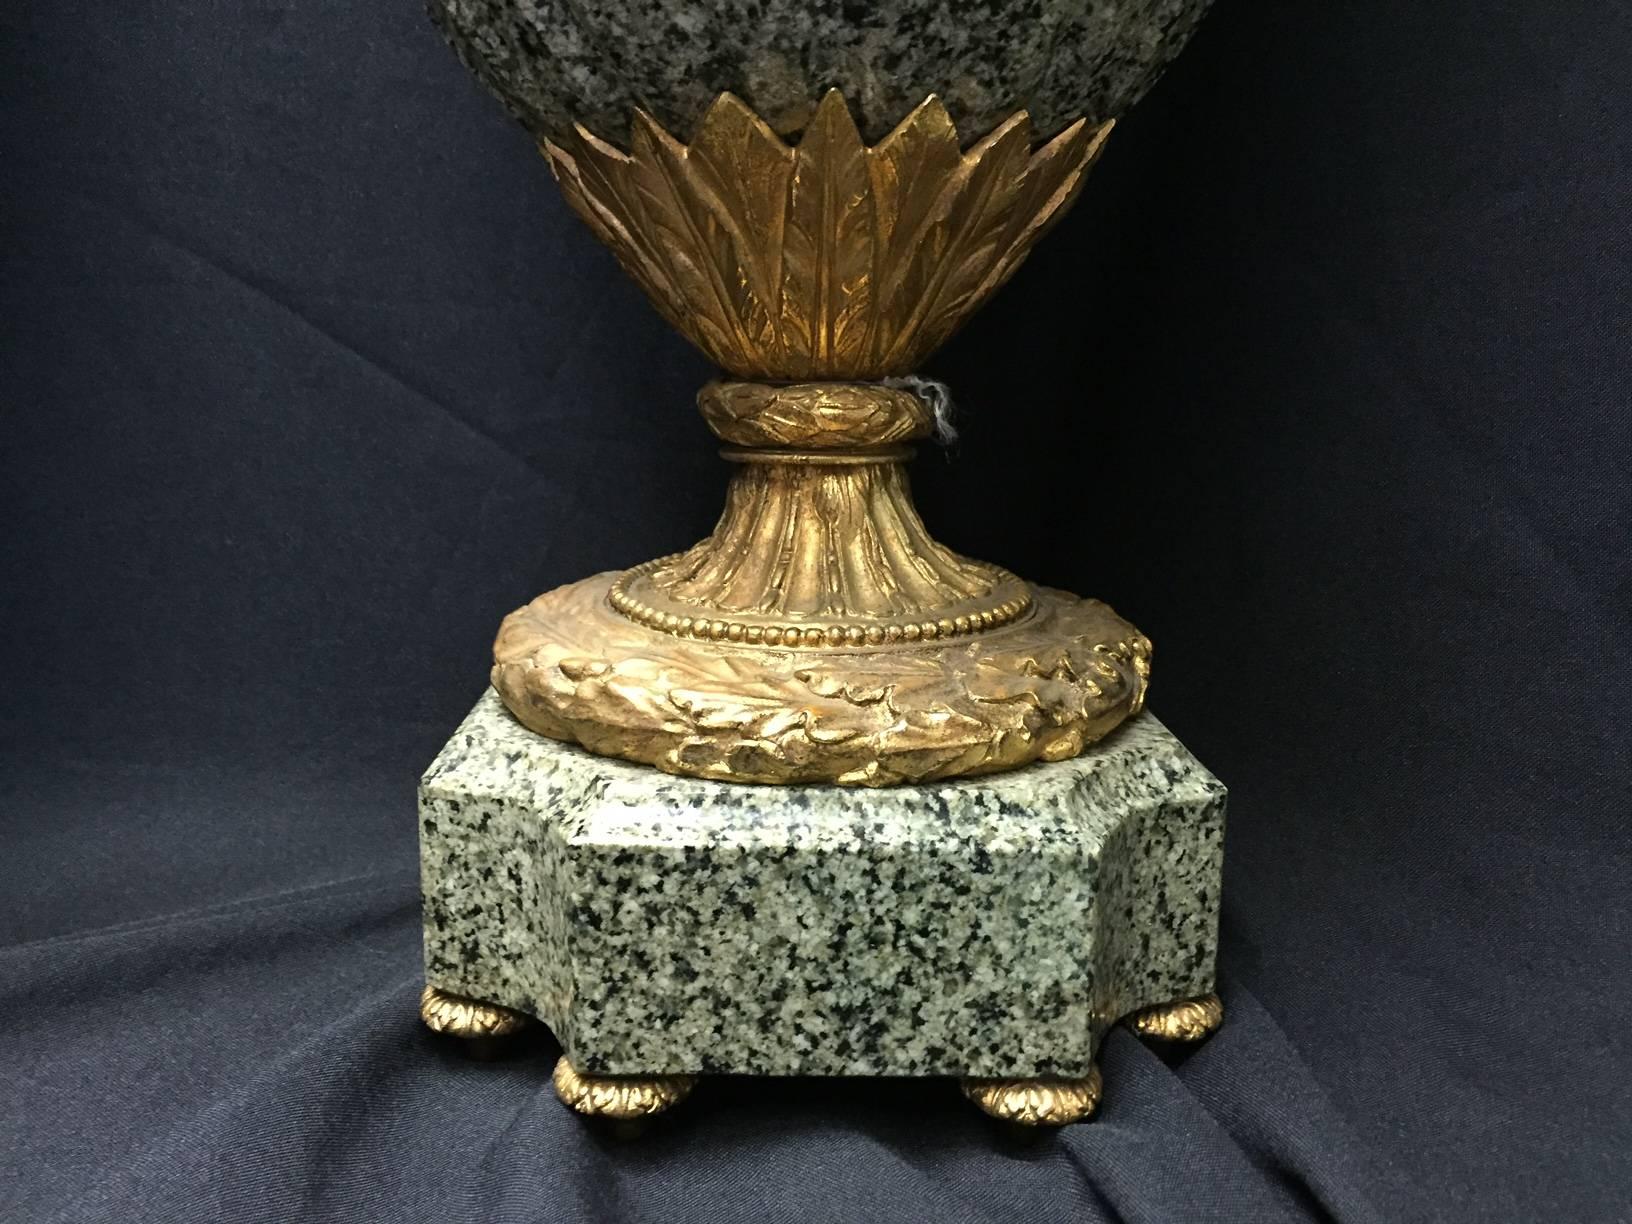 20th Century Pair of Italian Neoclassical Style Ormolu Mounted Marble Urns